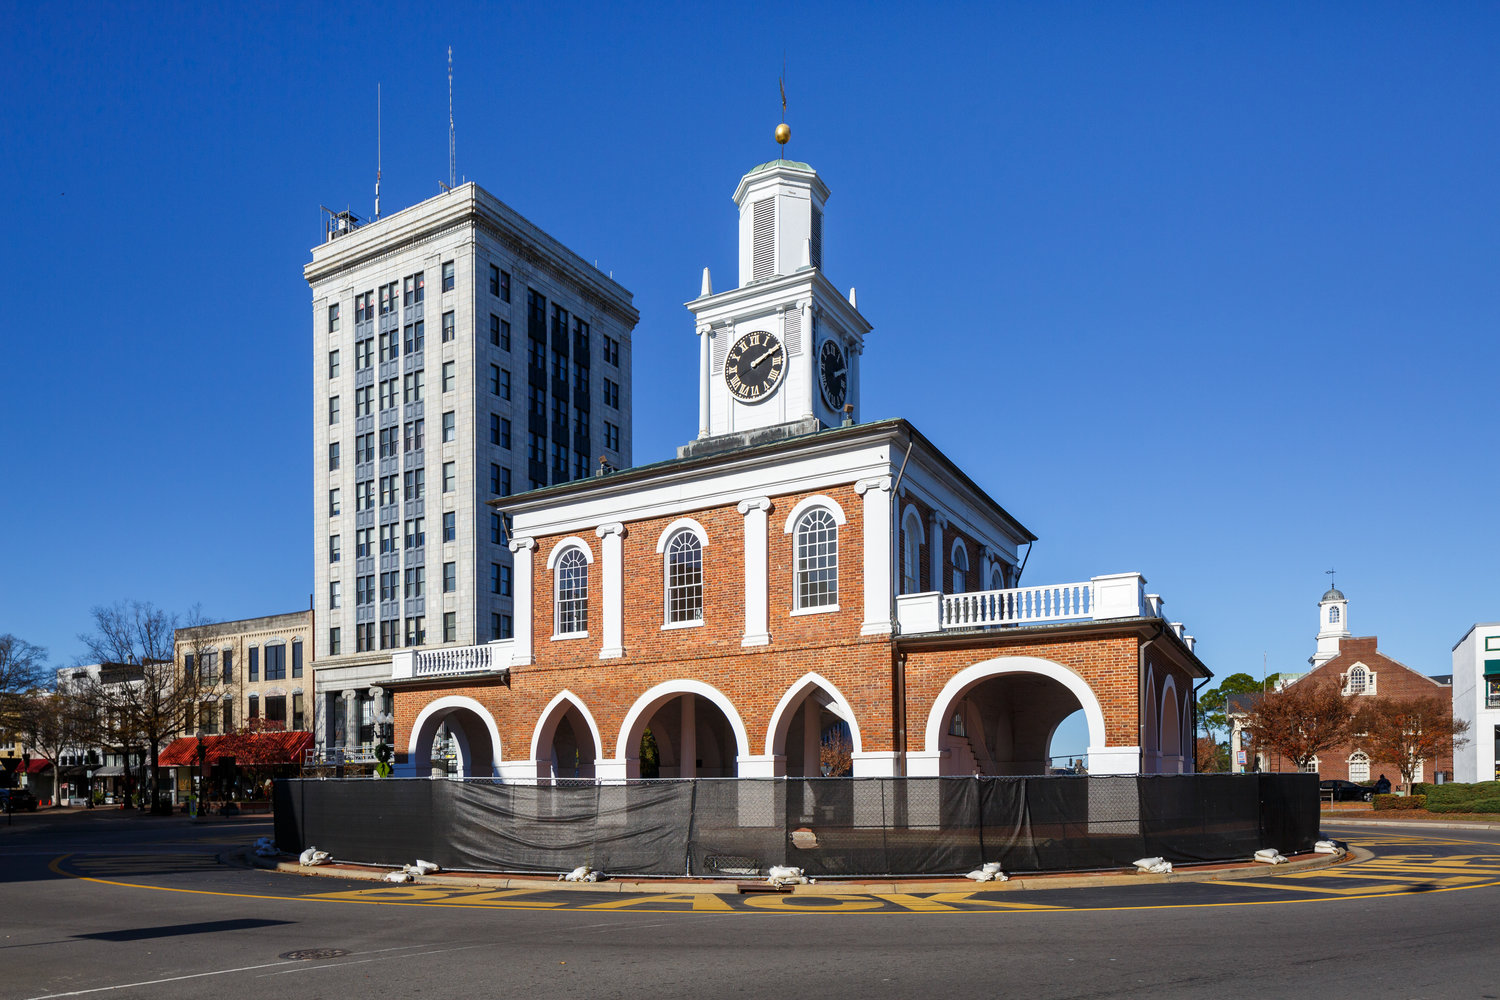 A councilwoman’s effort to withdraw funding for repurposing the Market House failed Monday night at a work session of the Fayetteville City Council.